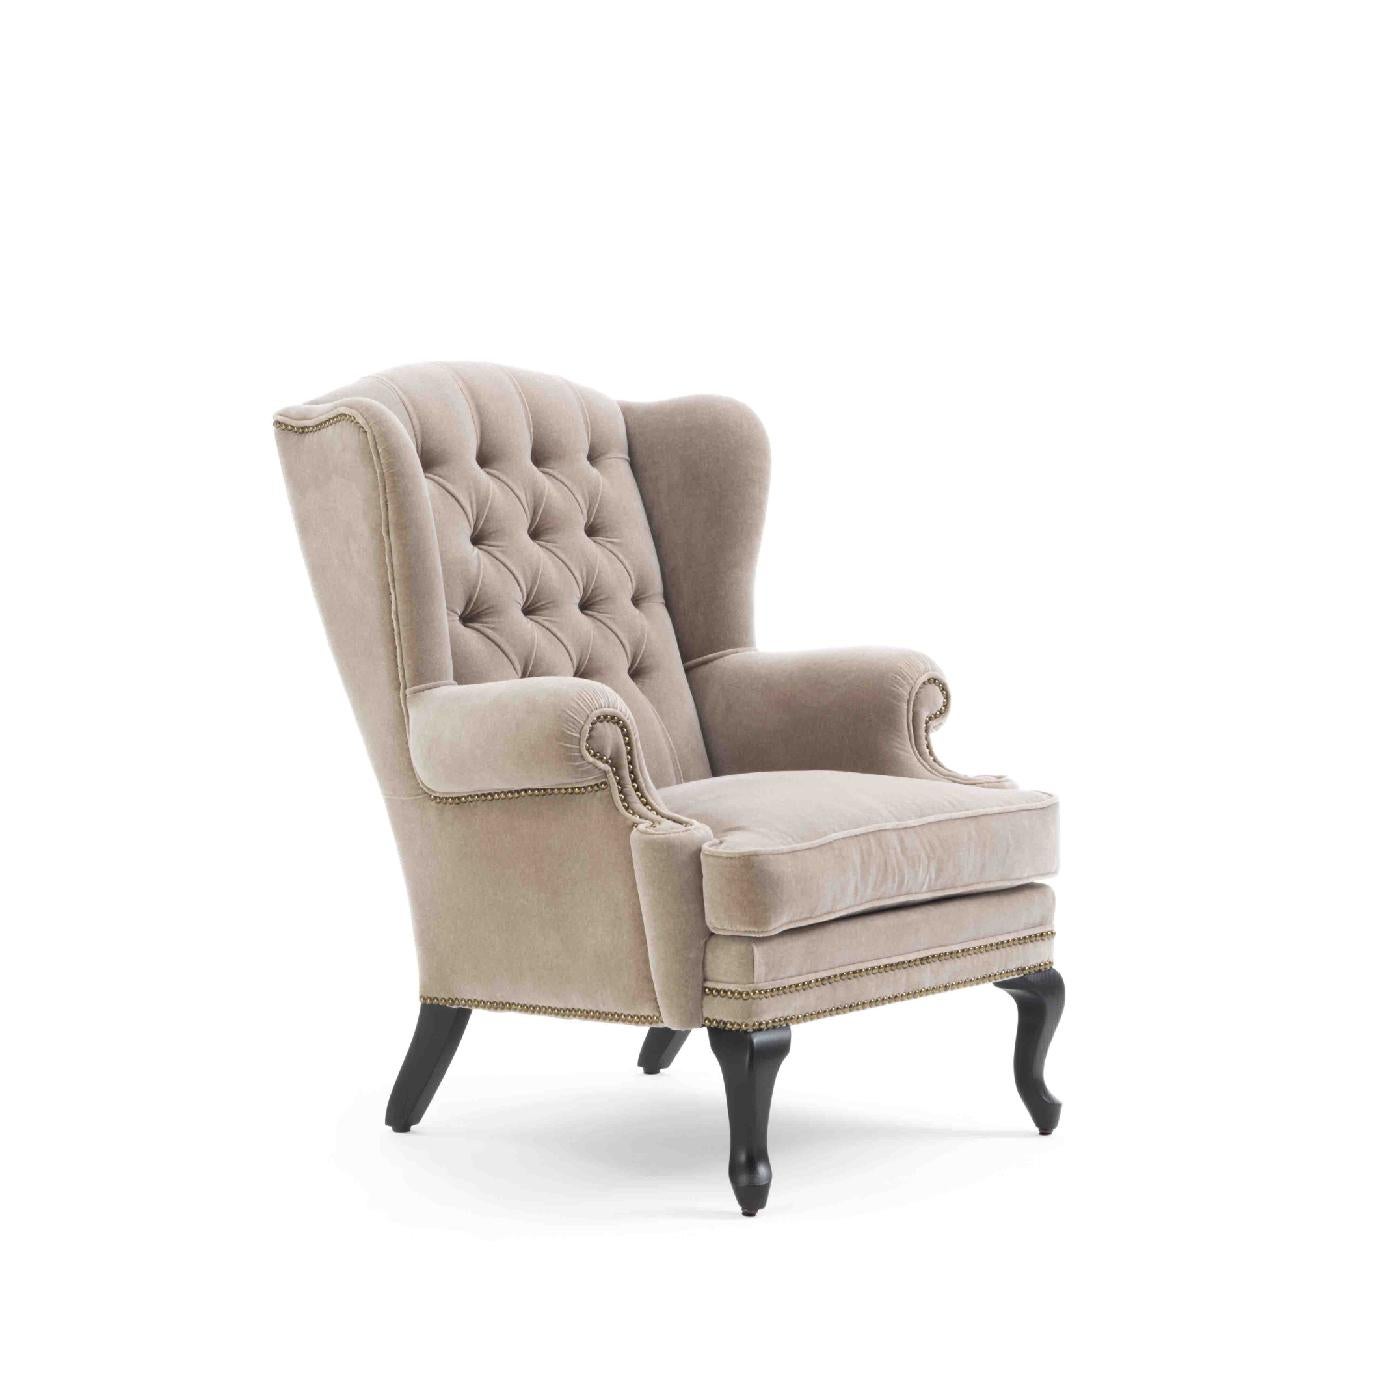 This inviting and sophisticated armchair has a strong visual aesthetic that will enliven a classic living room or private studio. A modern take on the wingback style, this piece has a solid wood frame and ash legs with an ebonized finish. Entirely